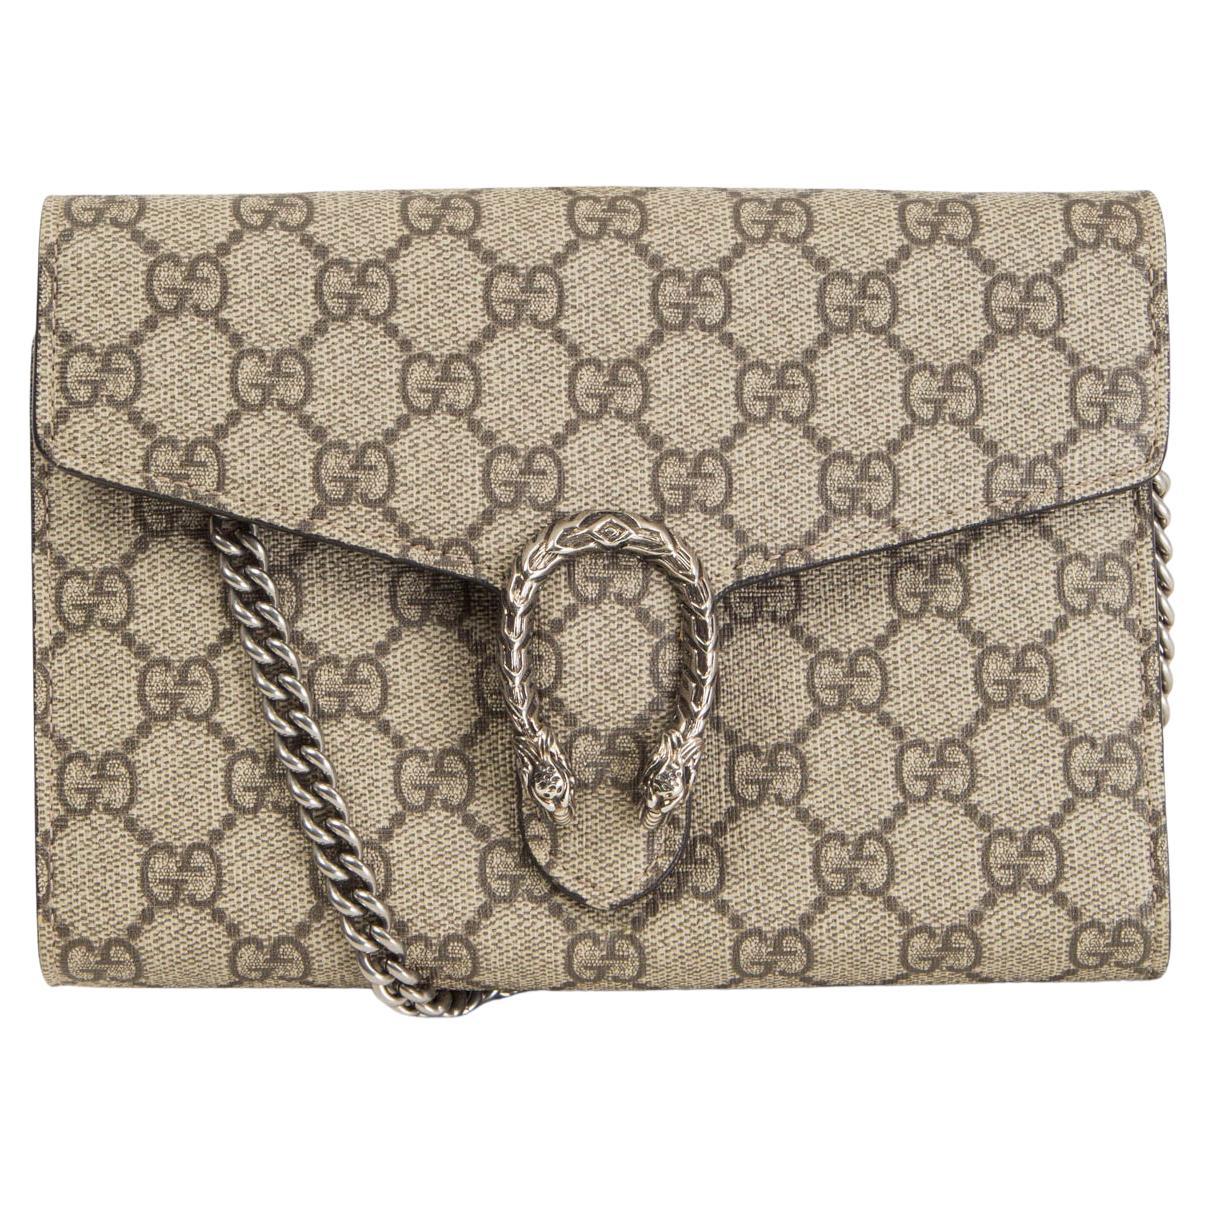 Dionysus mini chain wallet in beige and white GG Supreme